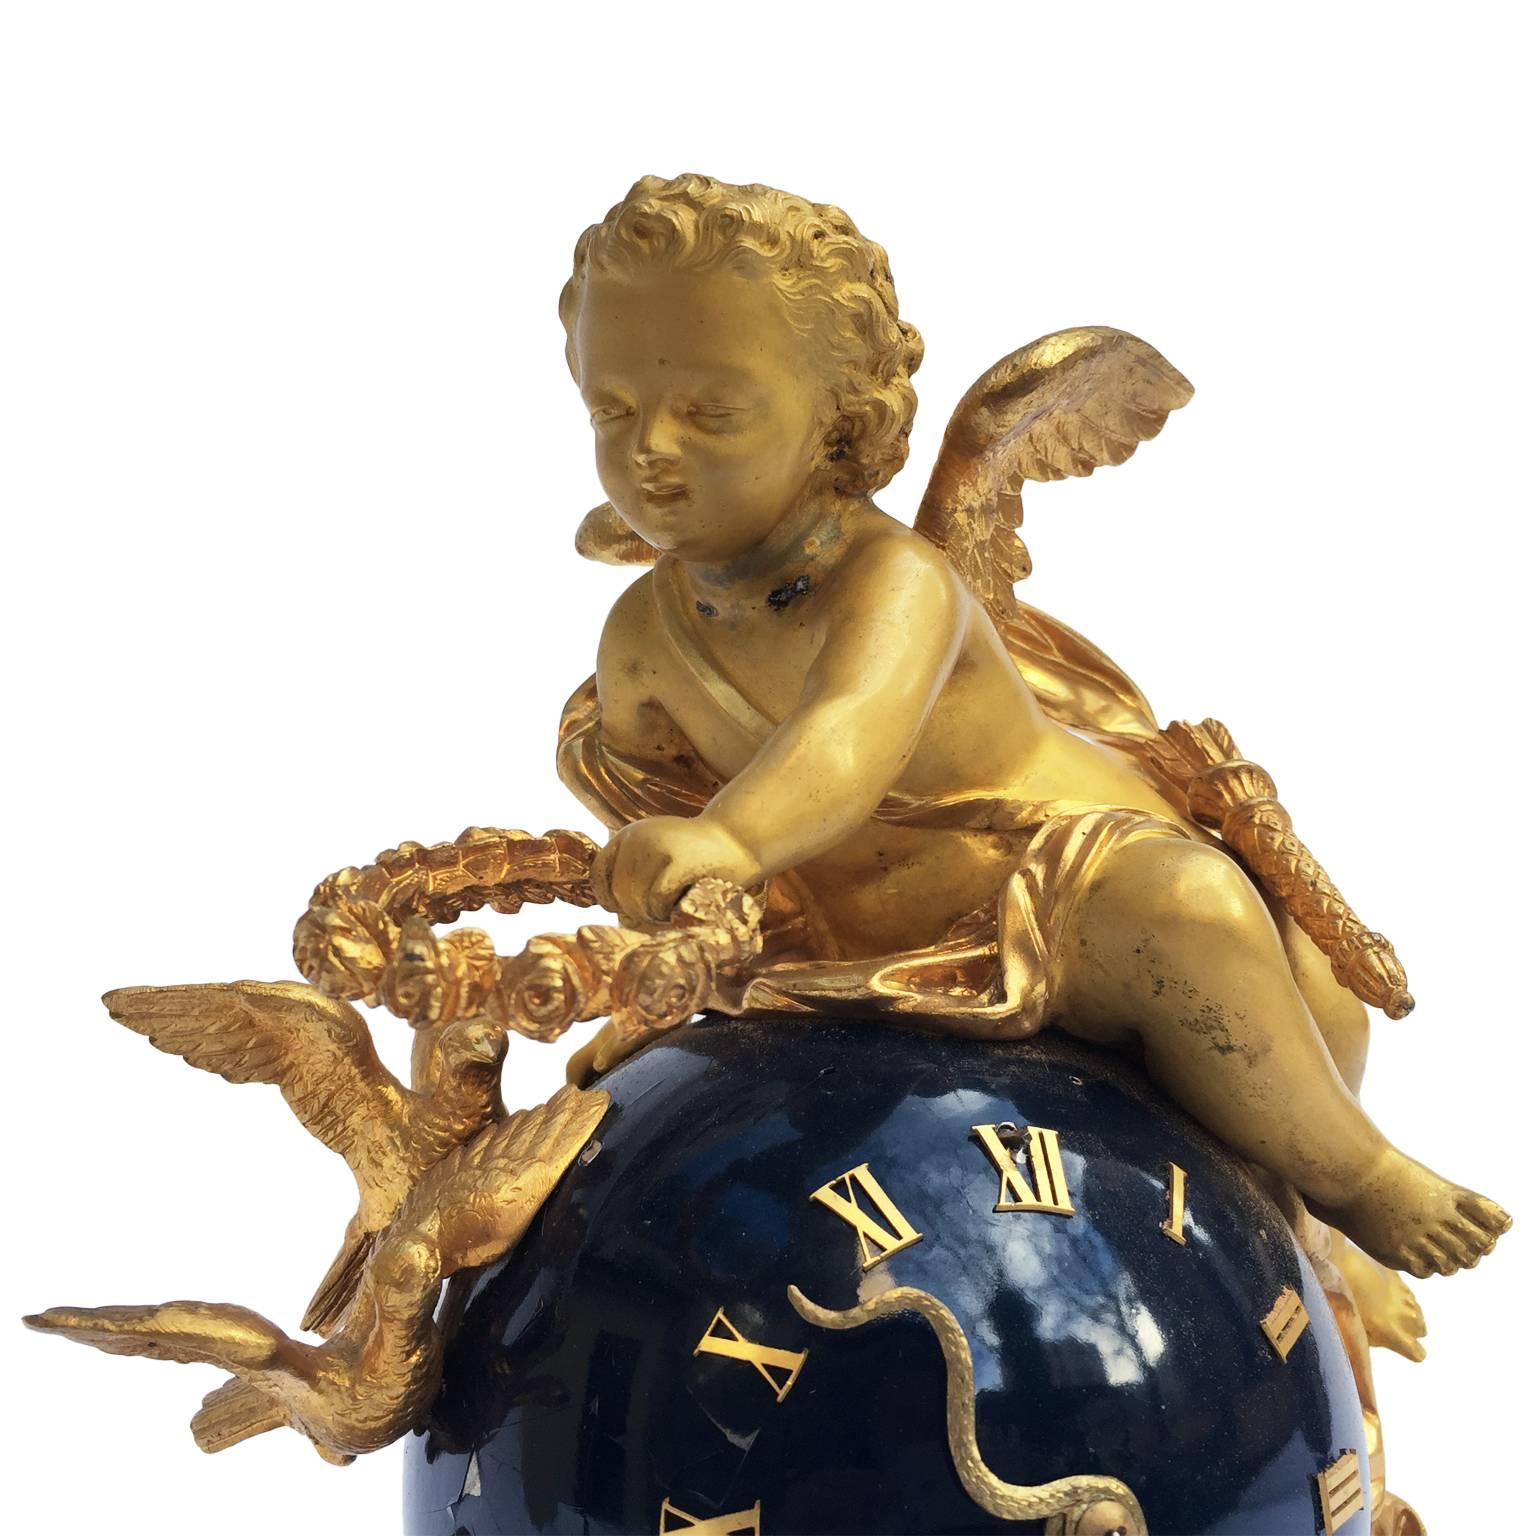 19th century gilt bronze table clock with cherubs, depicting painting and sculpture arts allegory. This unusual ormolu table clock is richly decorated with gilt cast bronze scrolling ornamental motifs, of very good quality chasing and with angels.